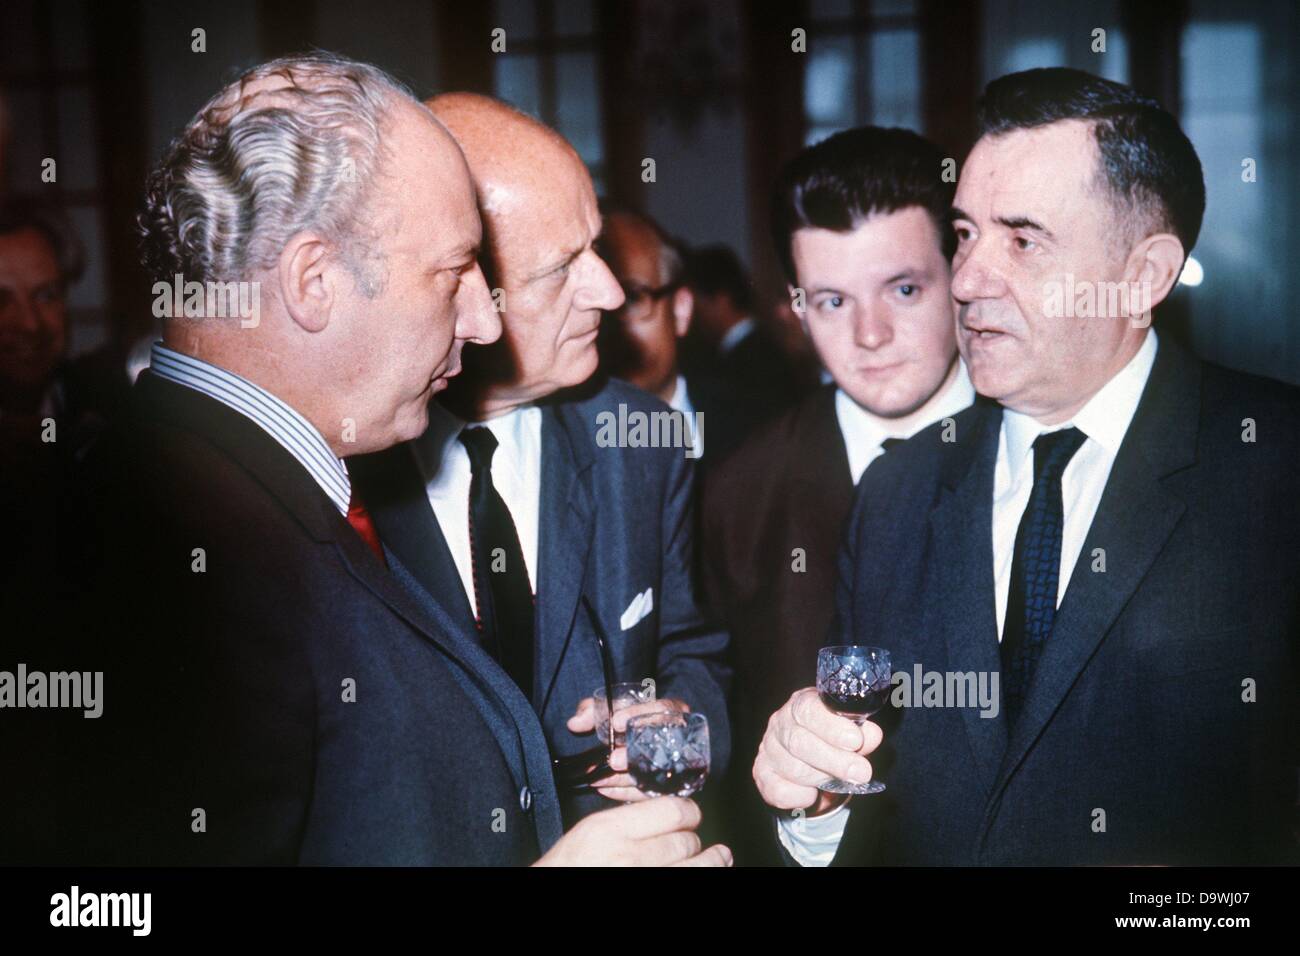 Foreign minister Walter Scheel (l) with Soviet foreign minister Andrei Gromyko during a reception on the occasion of the negotiations of the Moscow Treaty. Photographed in July 1970. Stock Photo